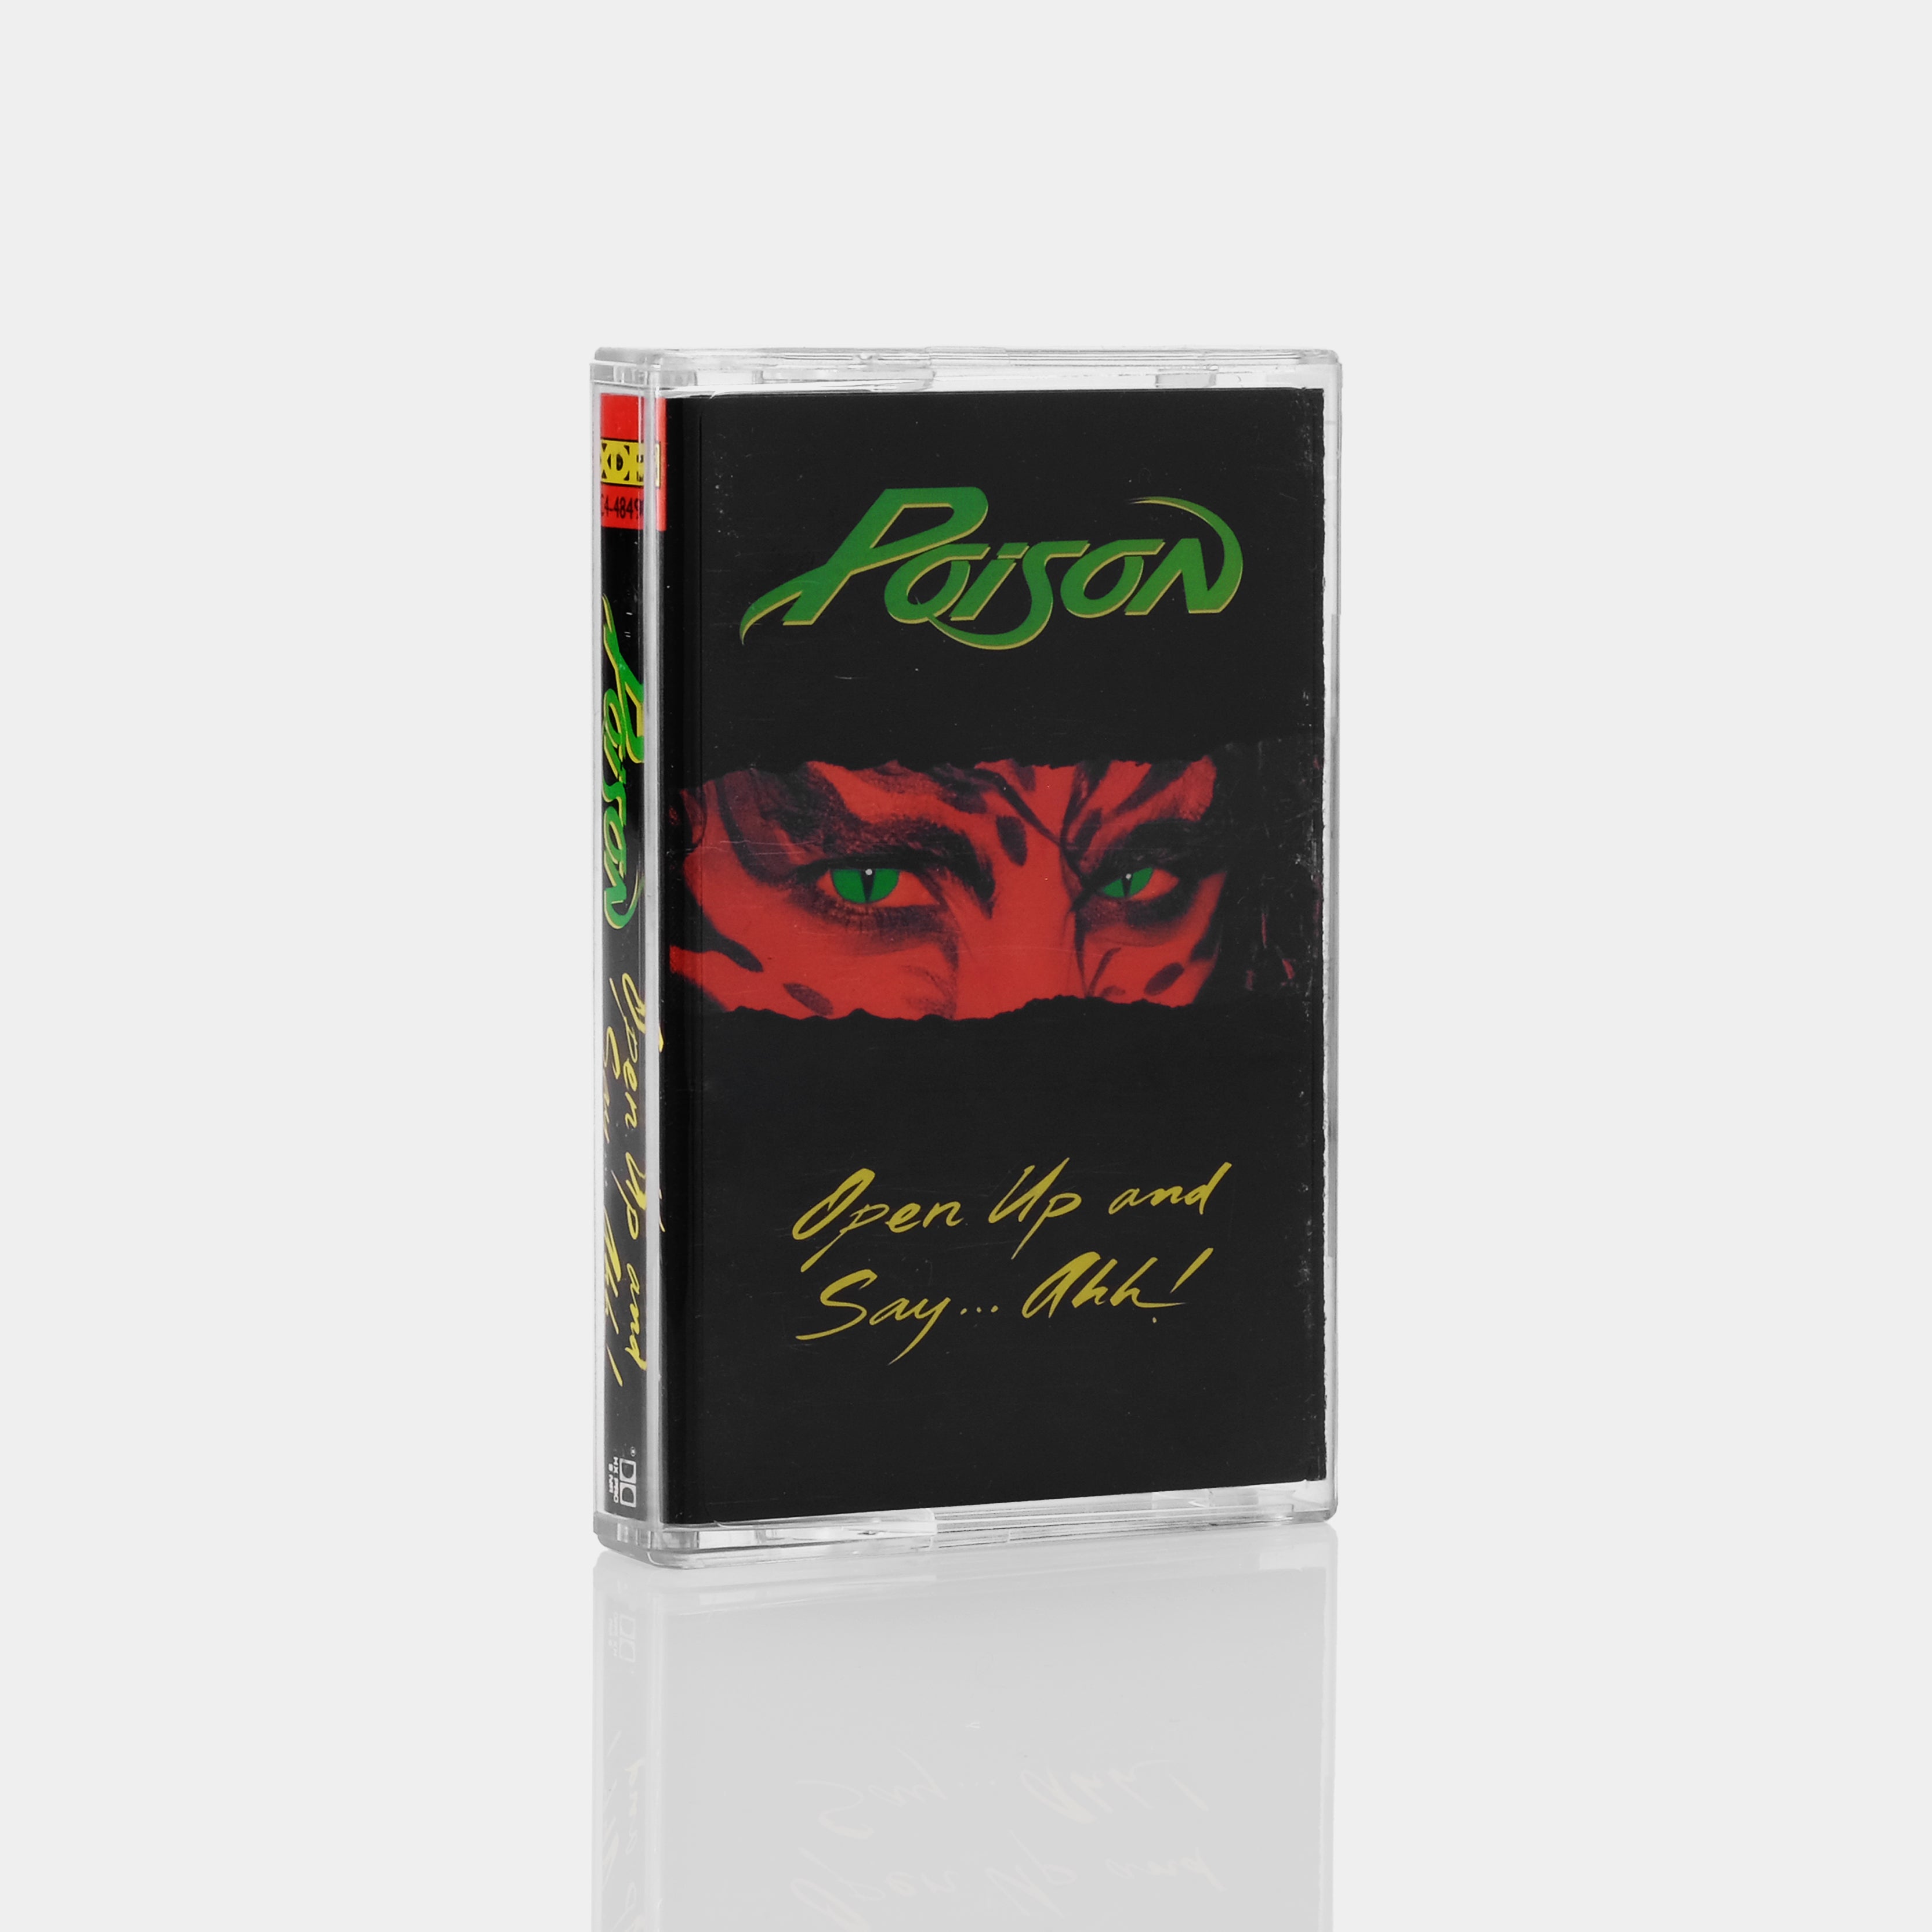 Poison - Open Up And Say ...Ahh! Cassette Tape